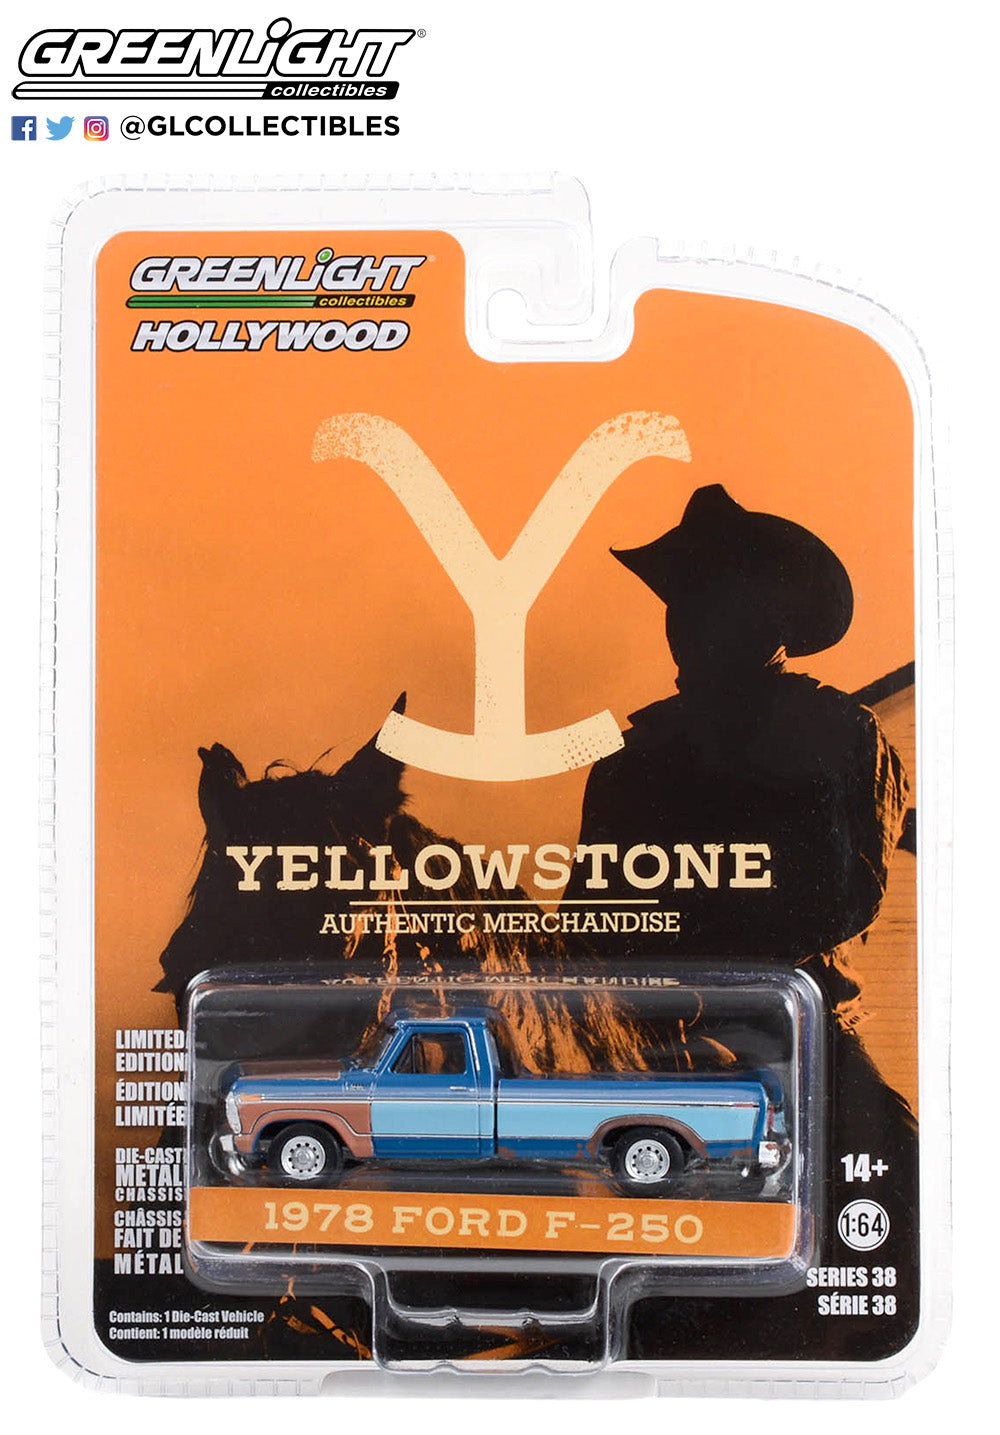 Hollywood Series 38 - Yellowstone (2018-Current TV Series) - 1978 Ford F-250 Solid Pack